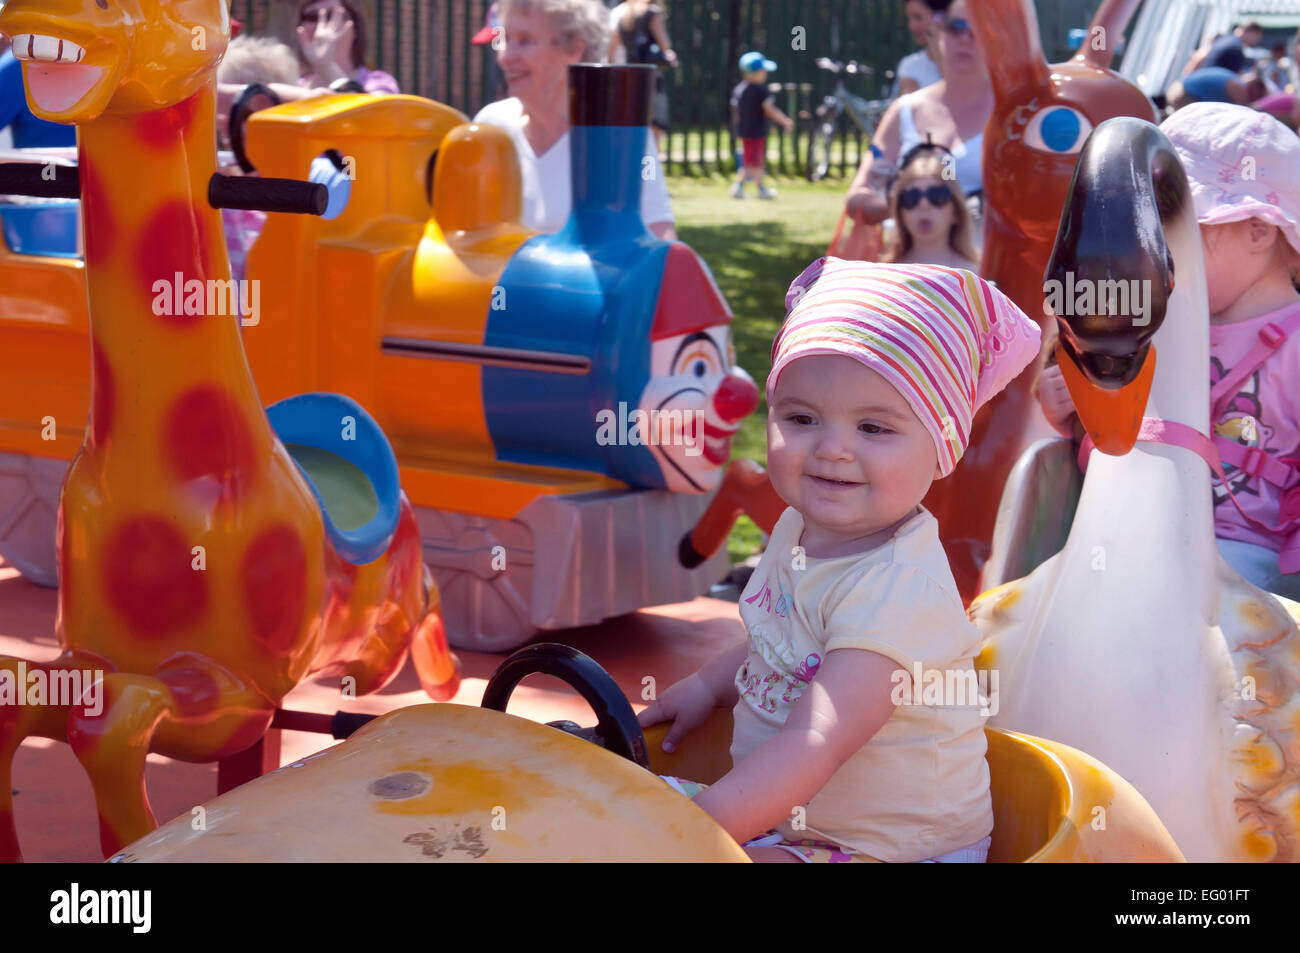 Smiling girl toddler enjoying a ride on a children's merry go round amusement ride at a local village fete. Hempstead Kent UK Stock Photo